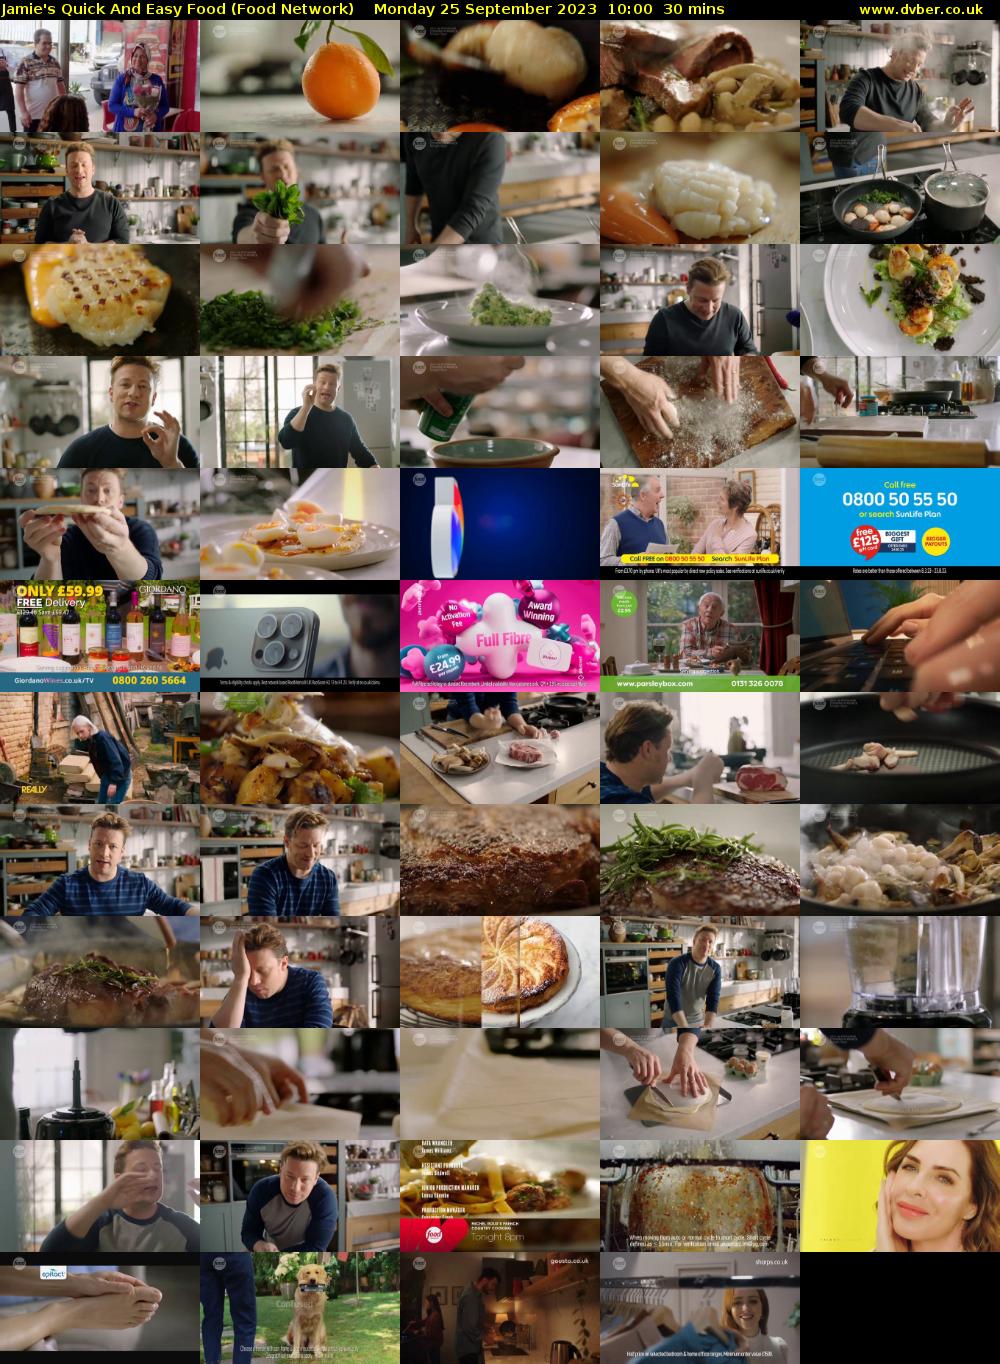 Jamie's Quick And Easy Food (Food Network) Monday 25 September 2023 10:00 - 10:30